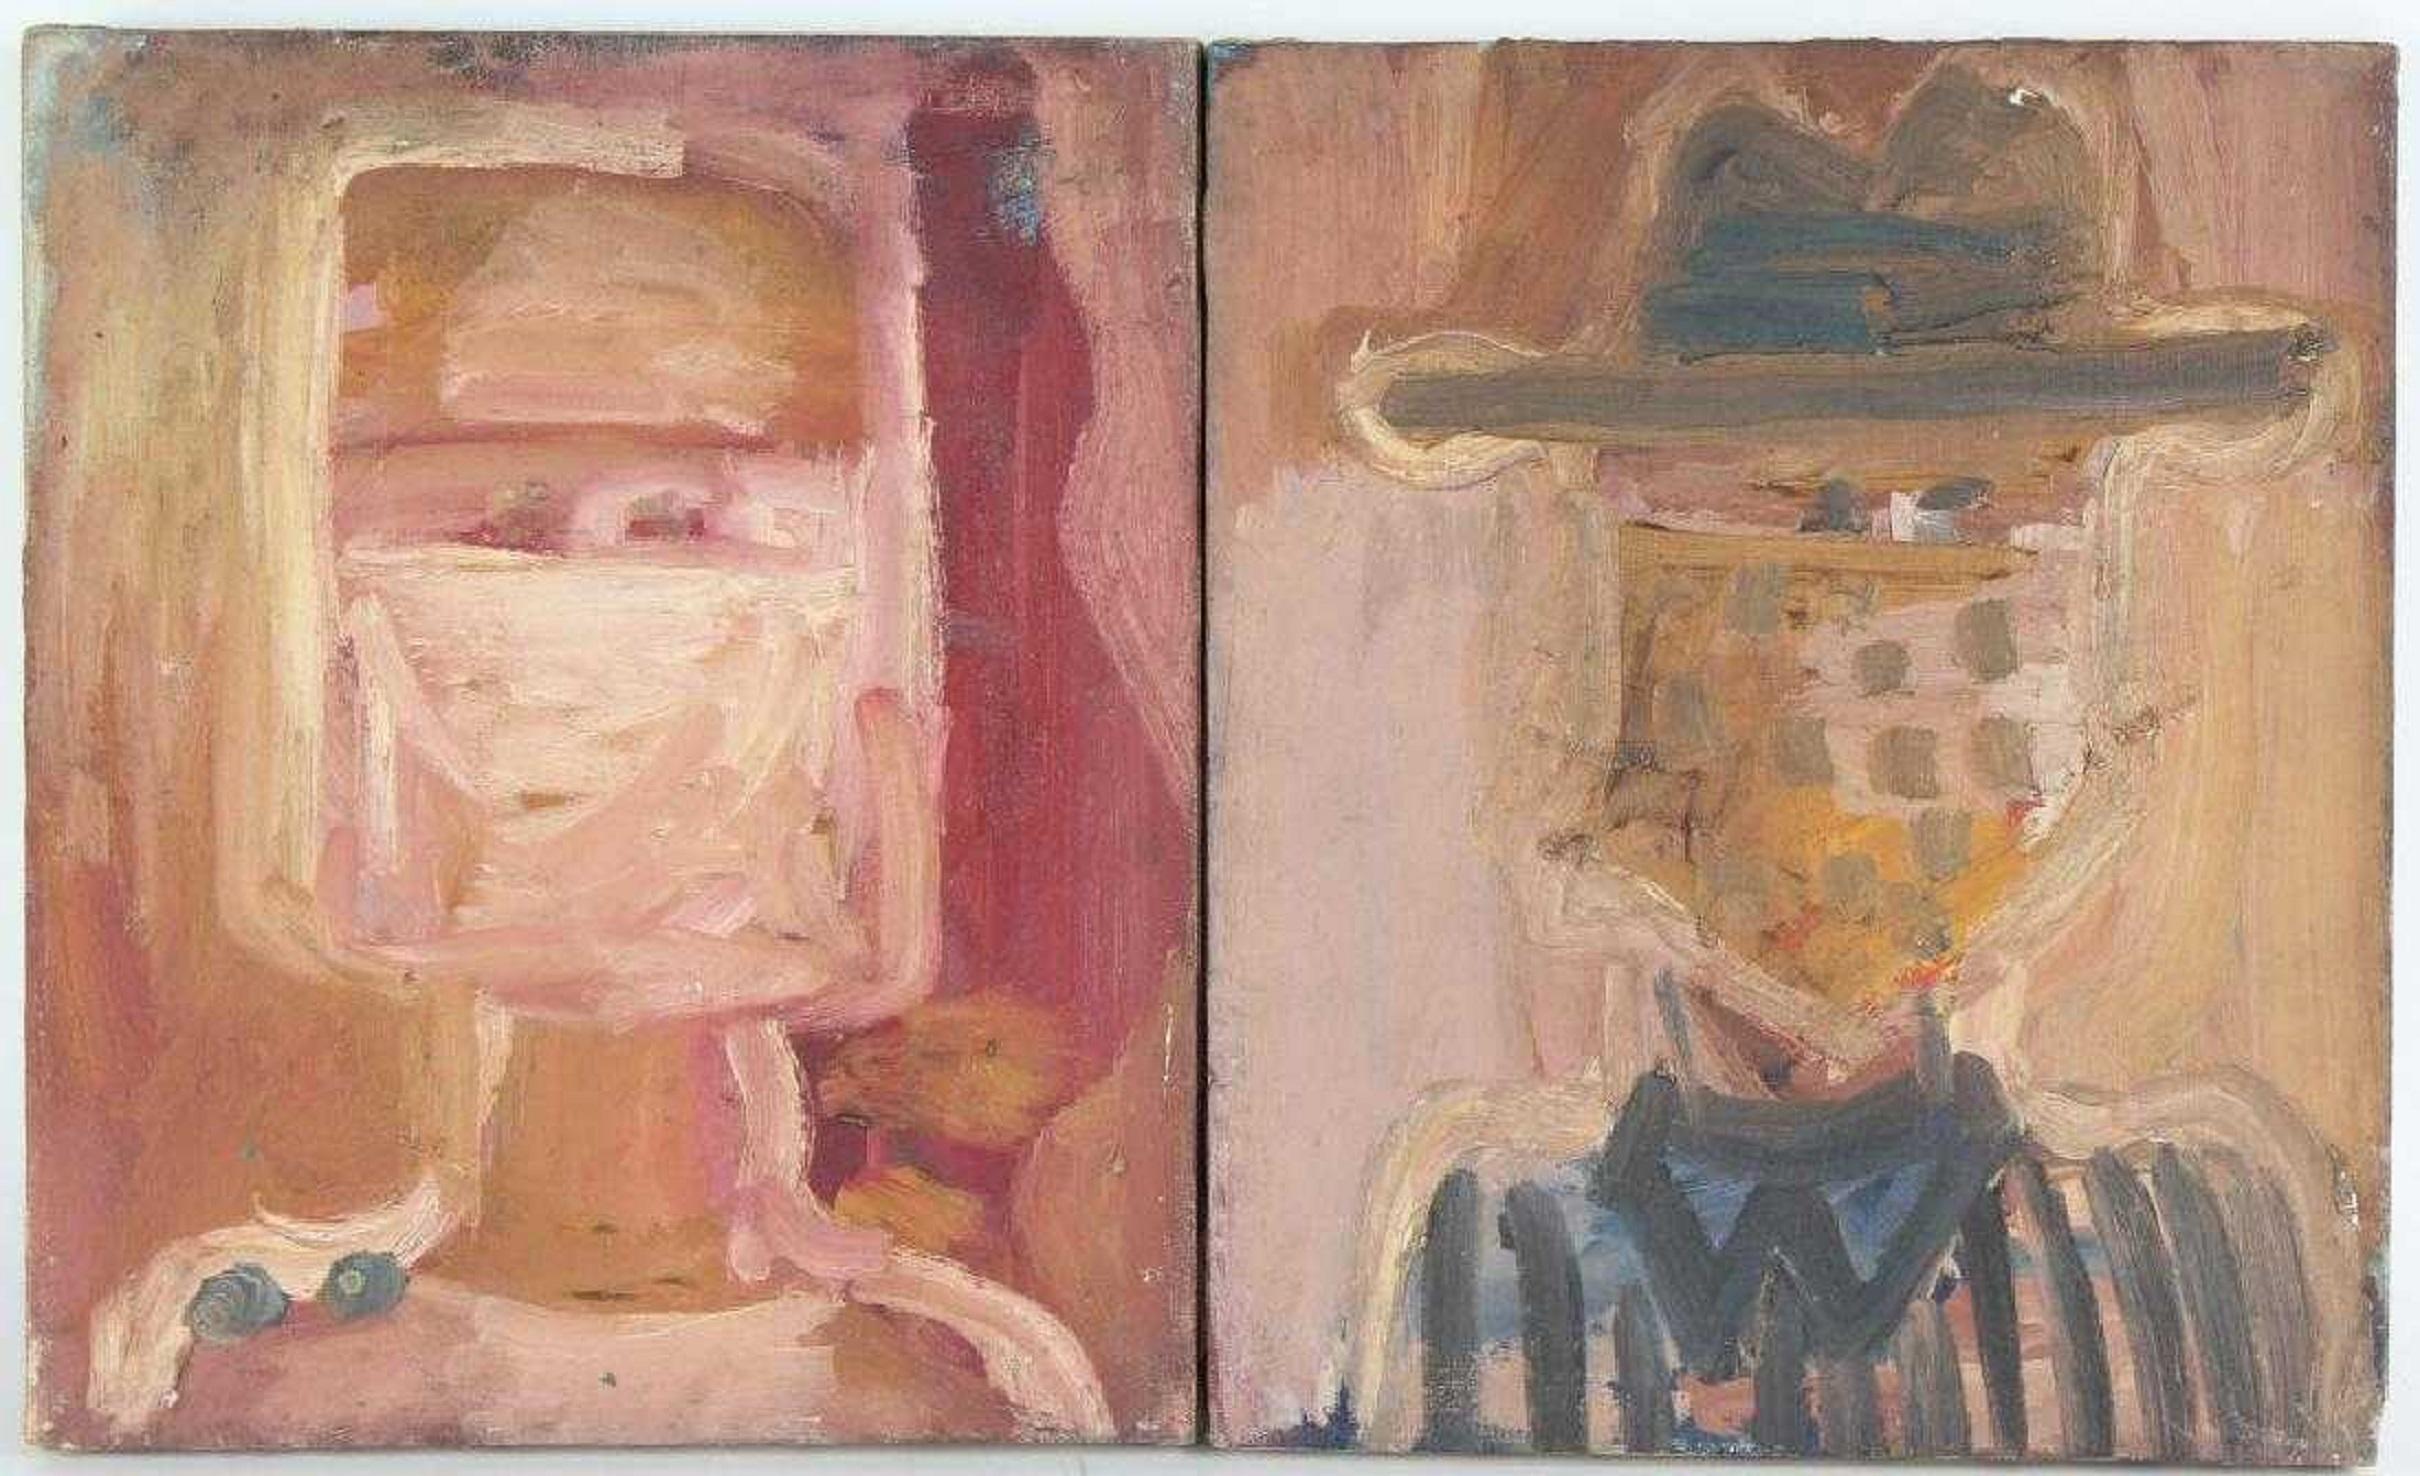 1 of 2 portraits we have available, 1 of woman, a nurse. (the last photo of cowboy and nurse is just for illustration purposes. this sale is just for the nurse. the cowboy is being offered seperately)
Patricia Hermine Sloane, PhD (1934 – 2001) also